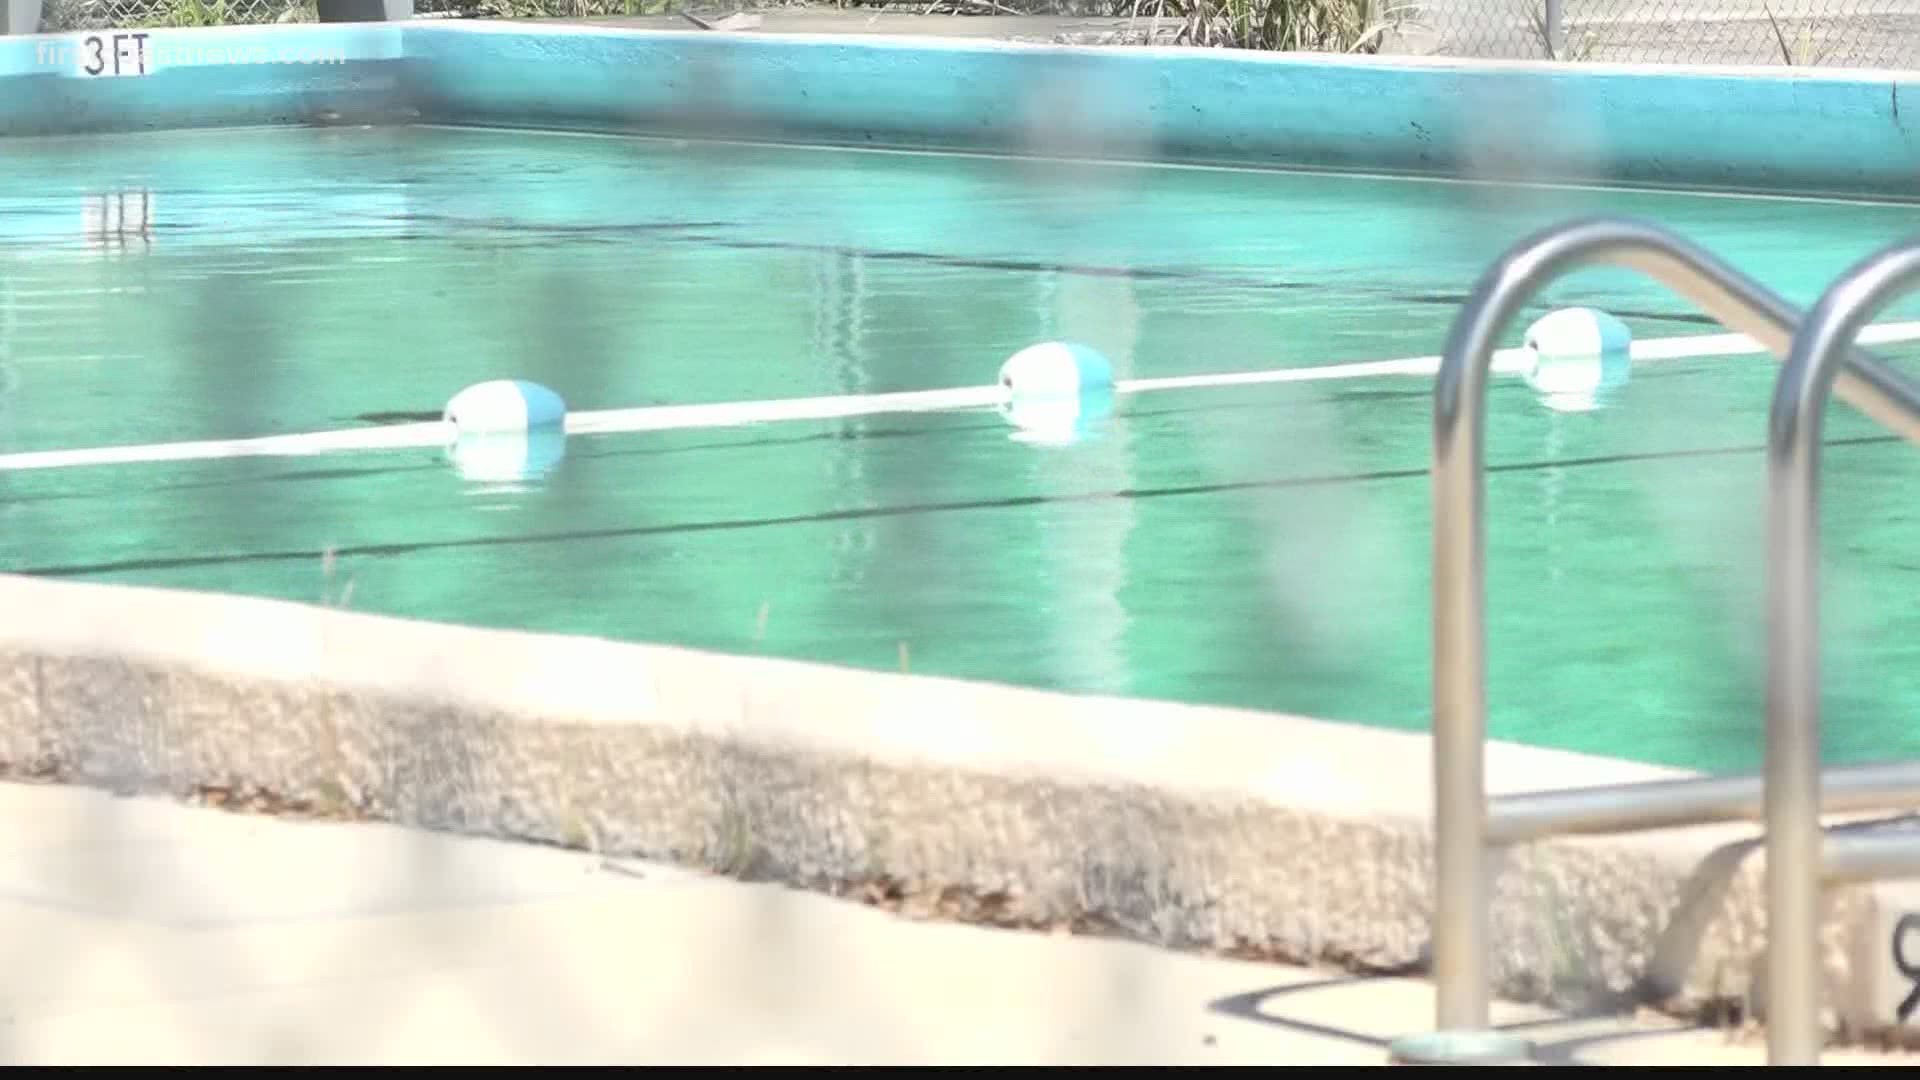 The reopening of Jacksonville's public pools will happen in four phases.